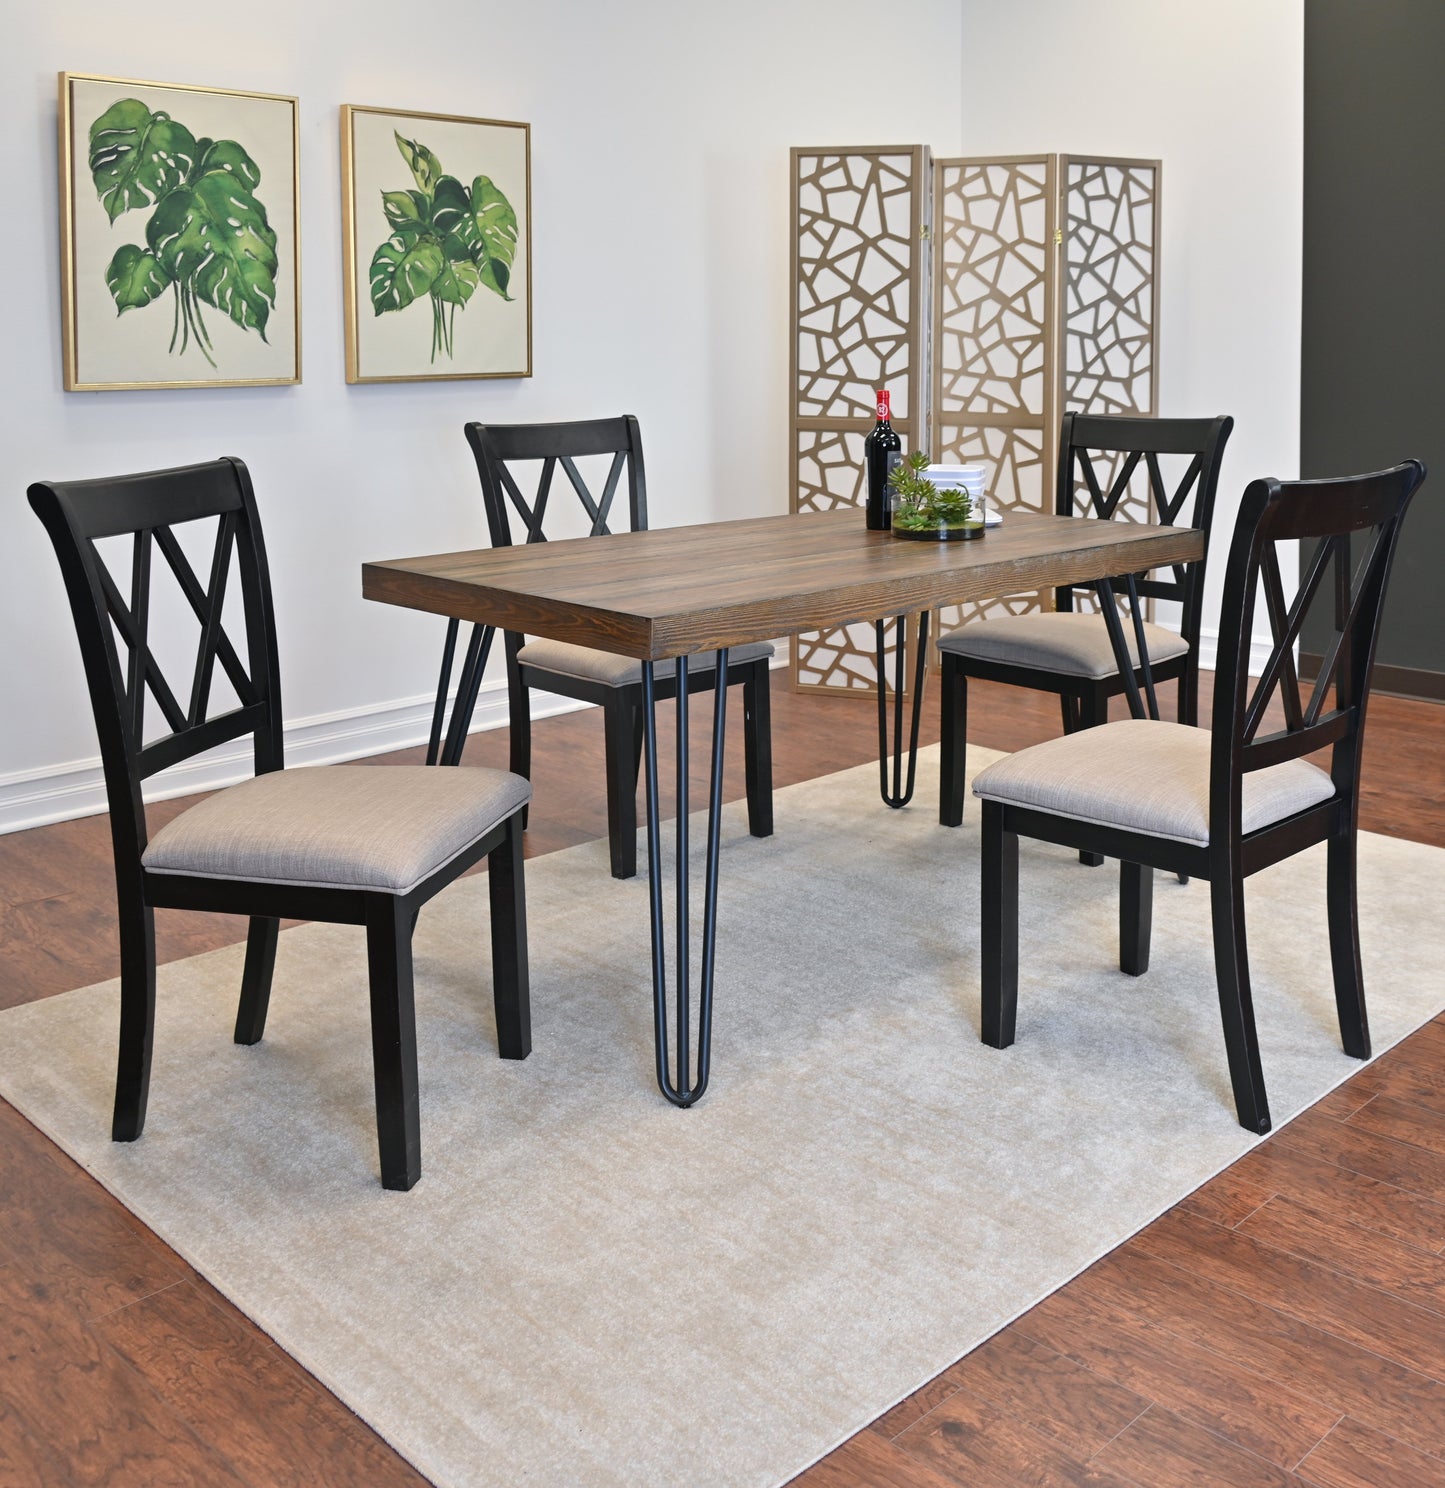 Arroyo 6-Piece Dining Set, Hairpin Dining Table with 4 Cross-back Chairs and Bench, Rich Black